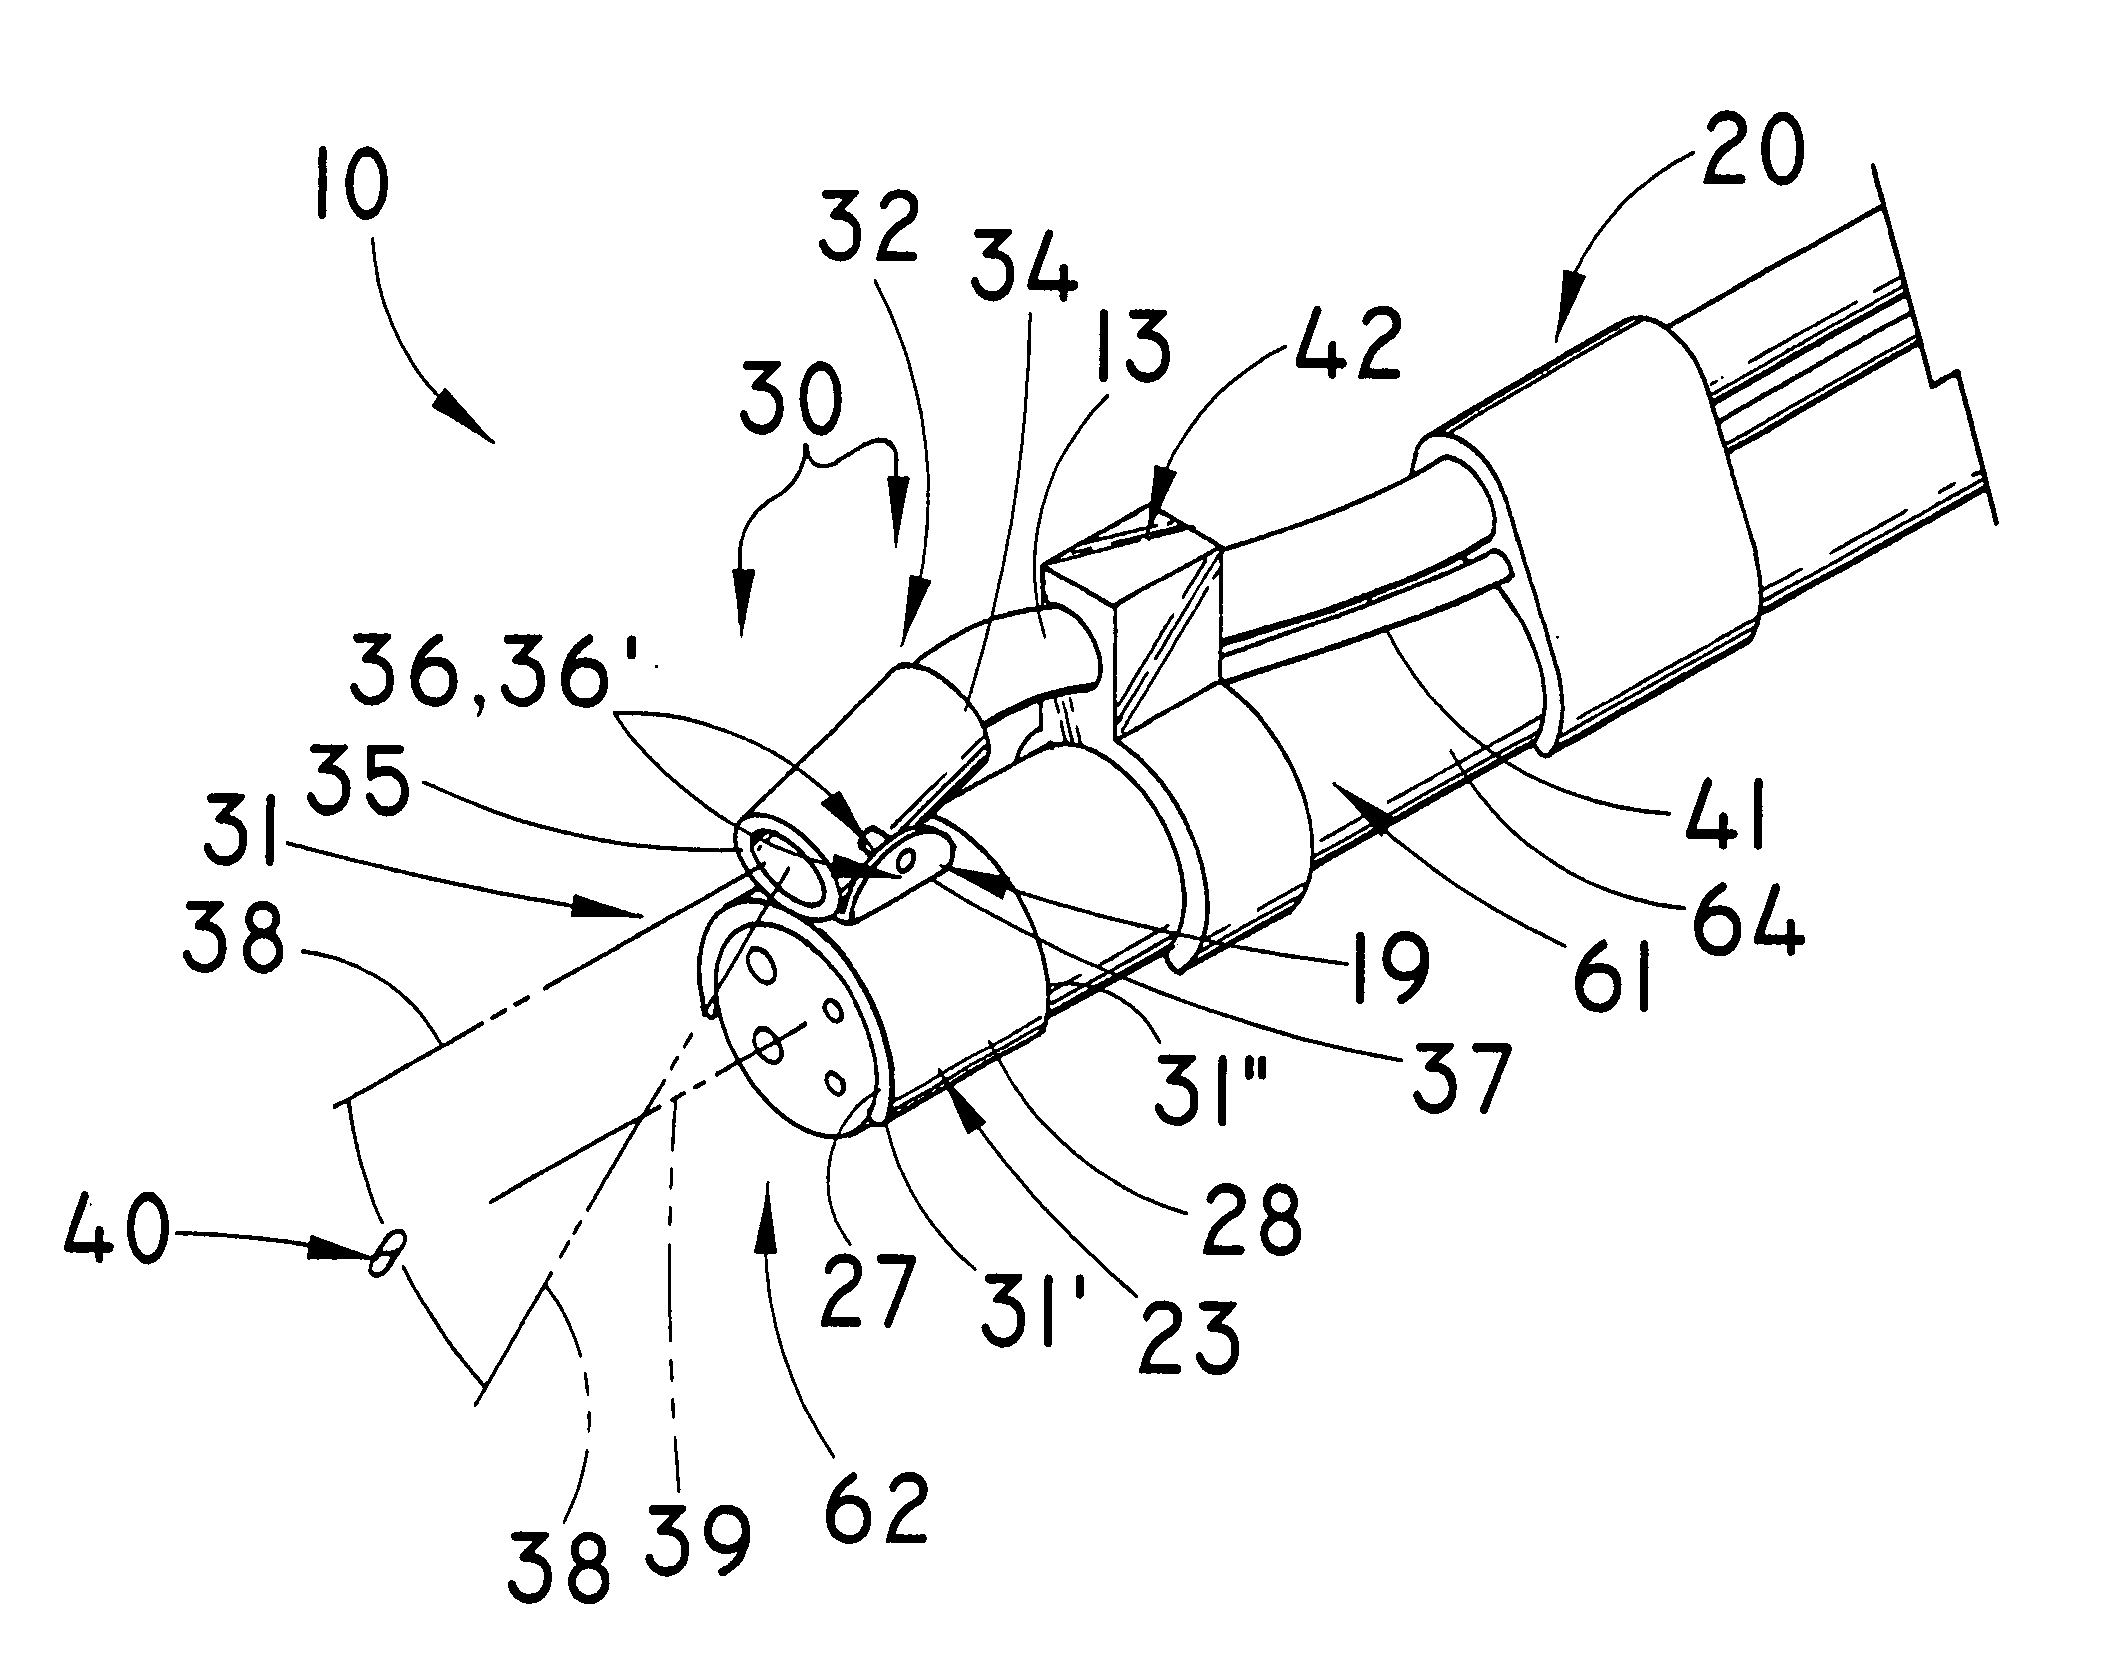 Endoscopic surgical access devices and methods of articulating an external accessory channel